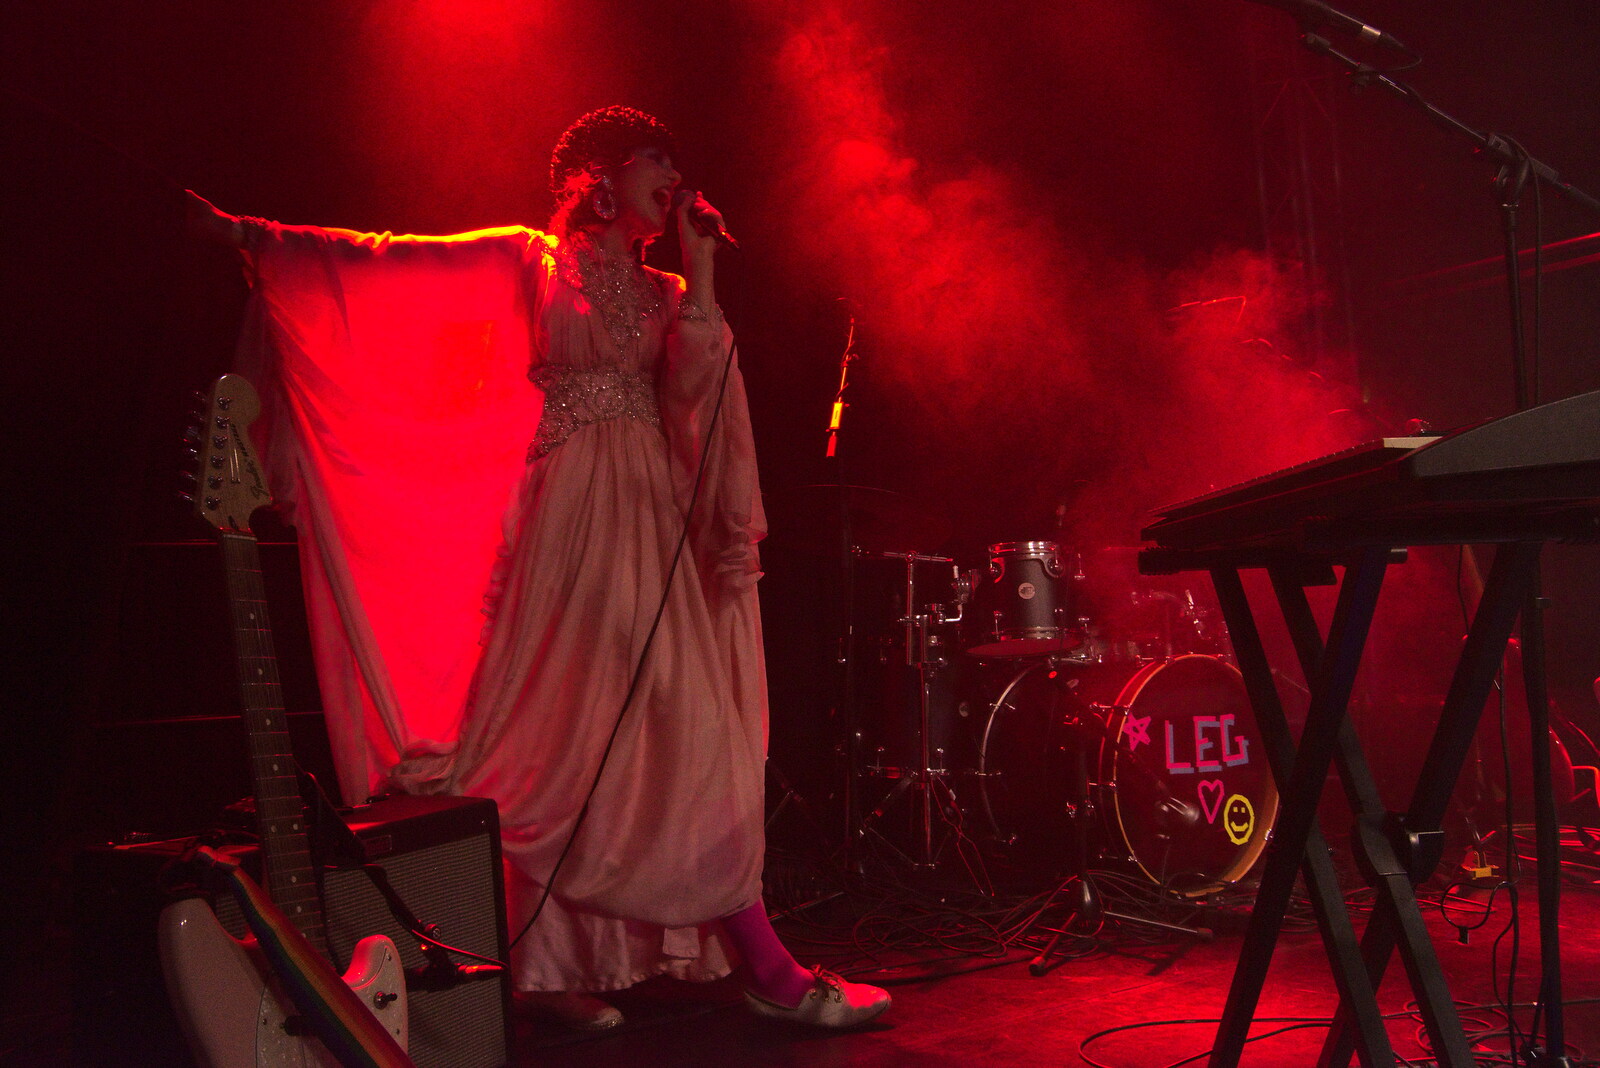 Vanity Fairy and Let's Eat Grandma, Arts Centre, Norwich - 26th January 2022: Daisy in a cloud of red